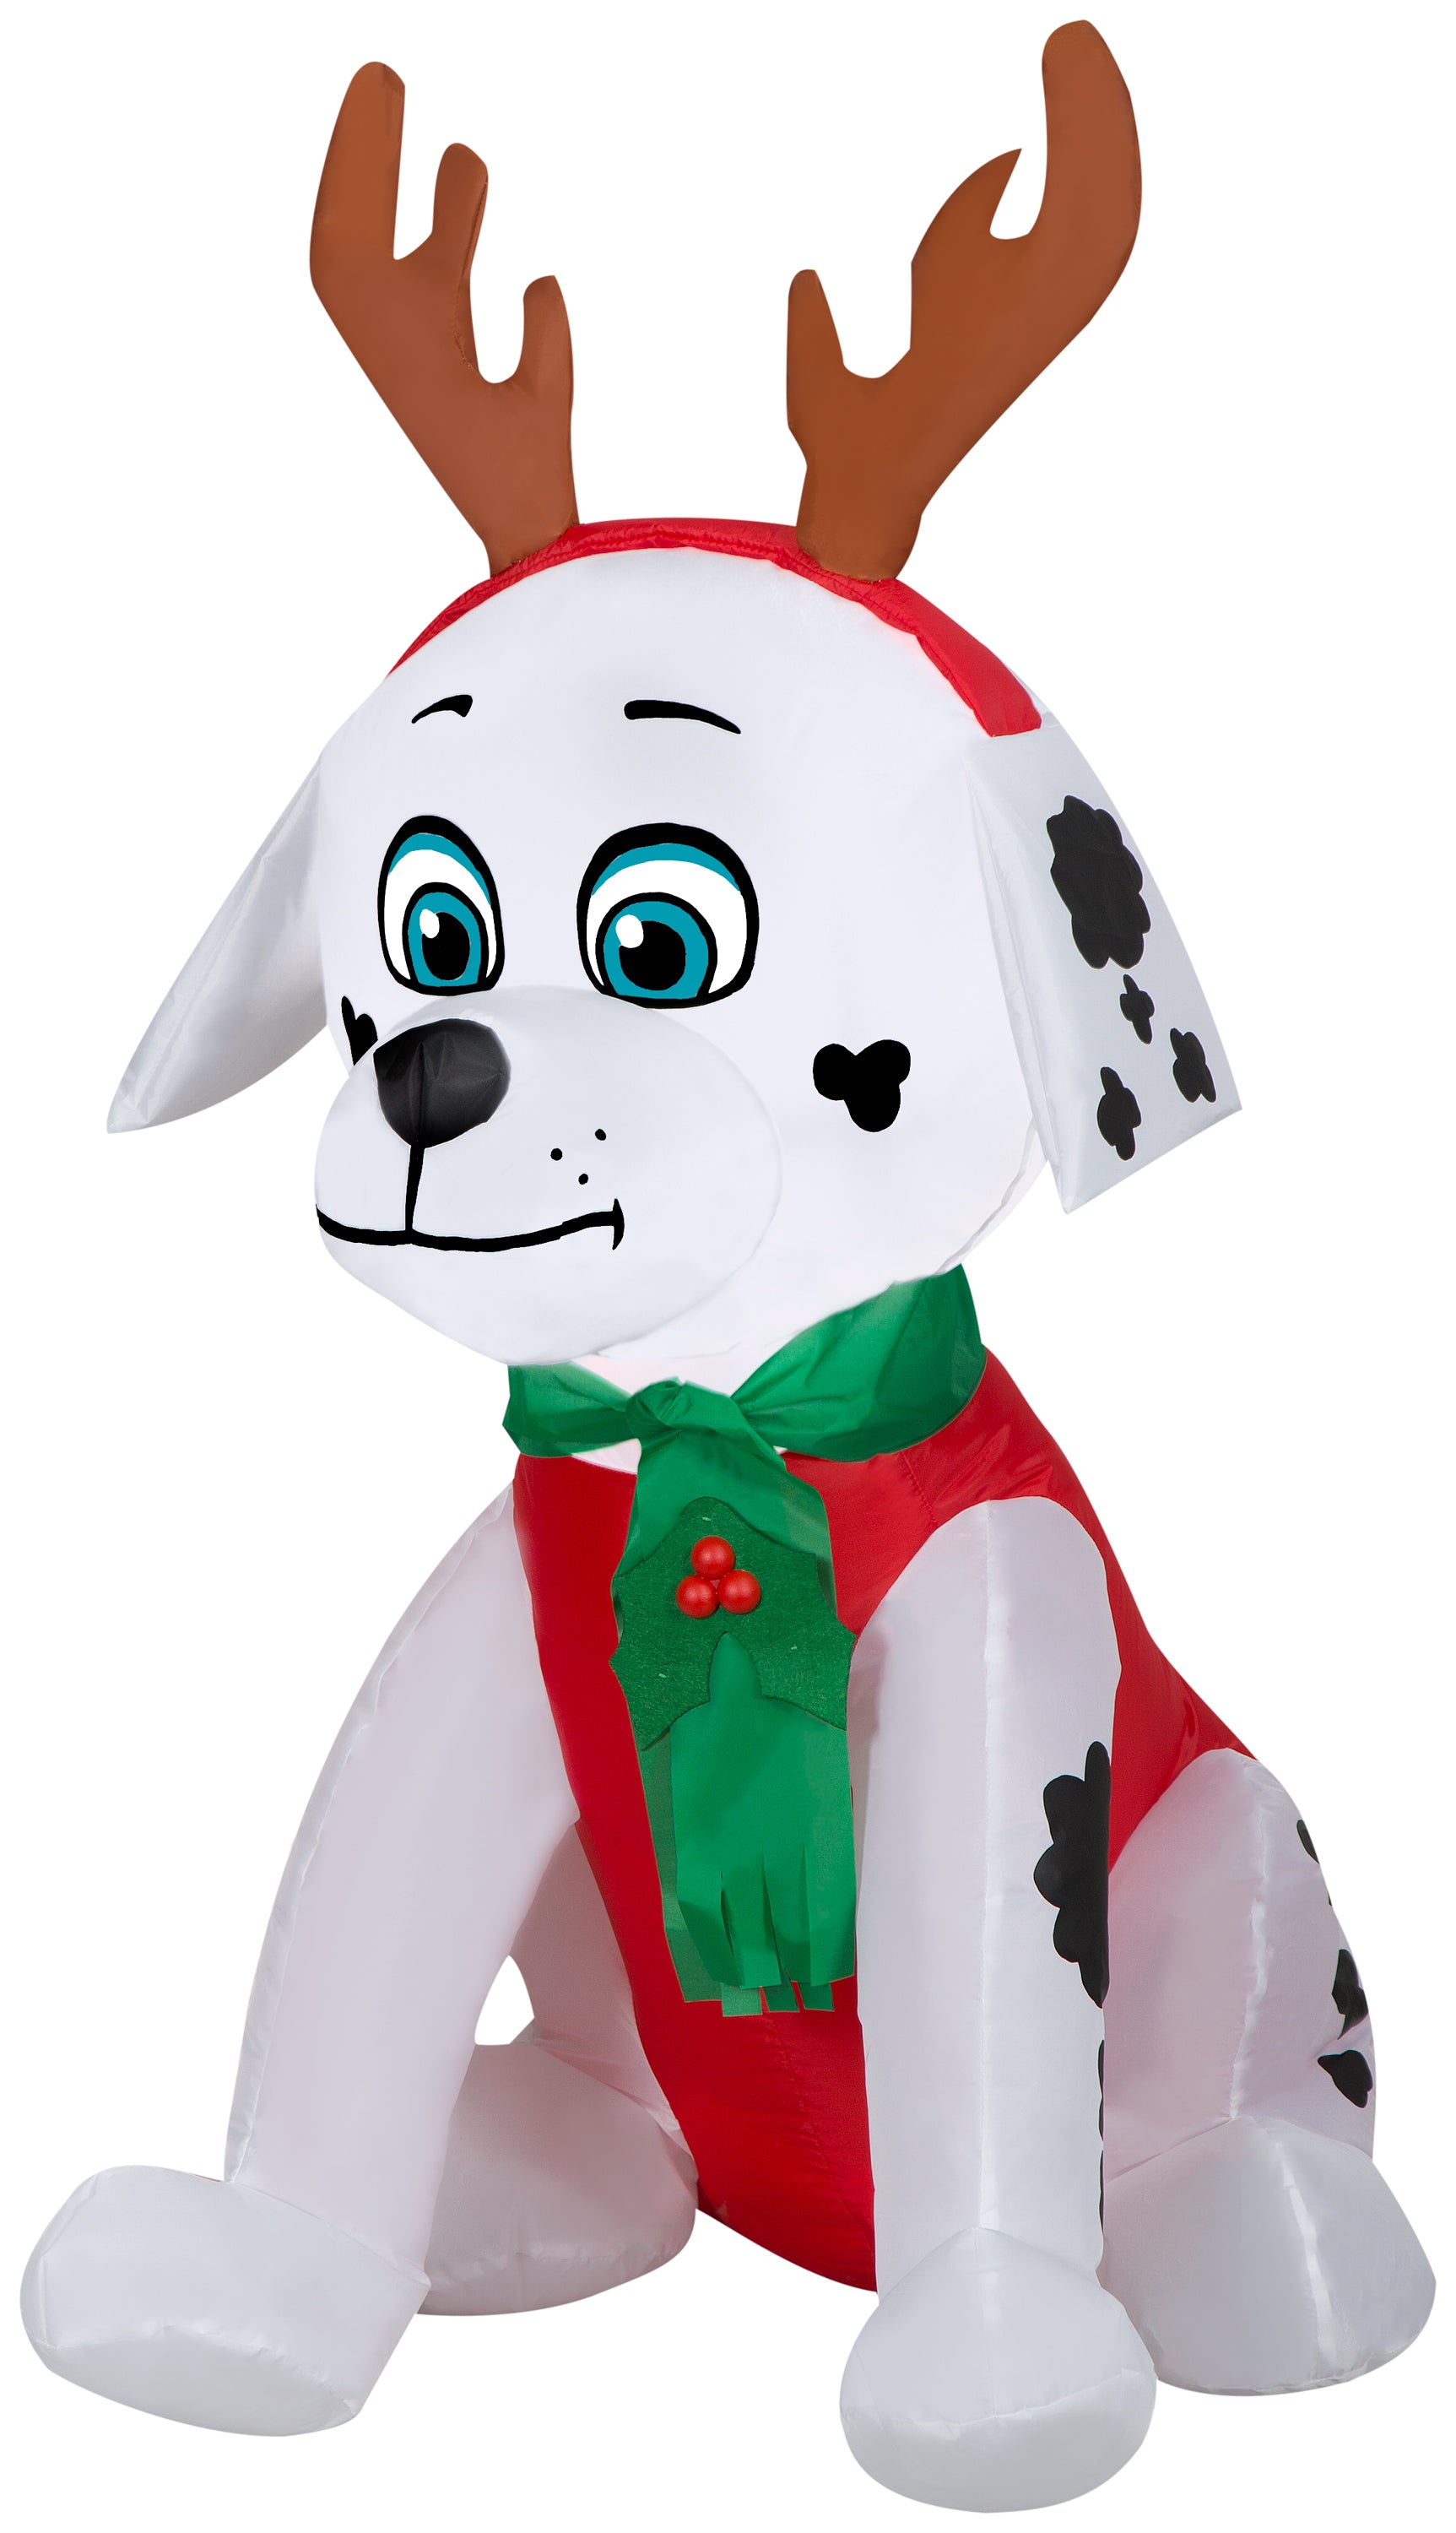 Gemmy Christmas Airblown Inflatable Marshall w/Antlers and Scarf Nick, 3.5 ft Tall, White